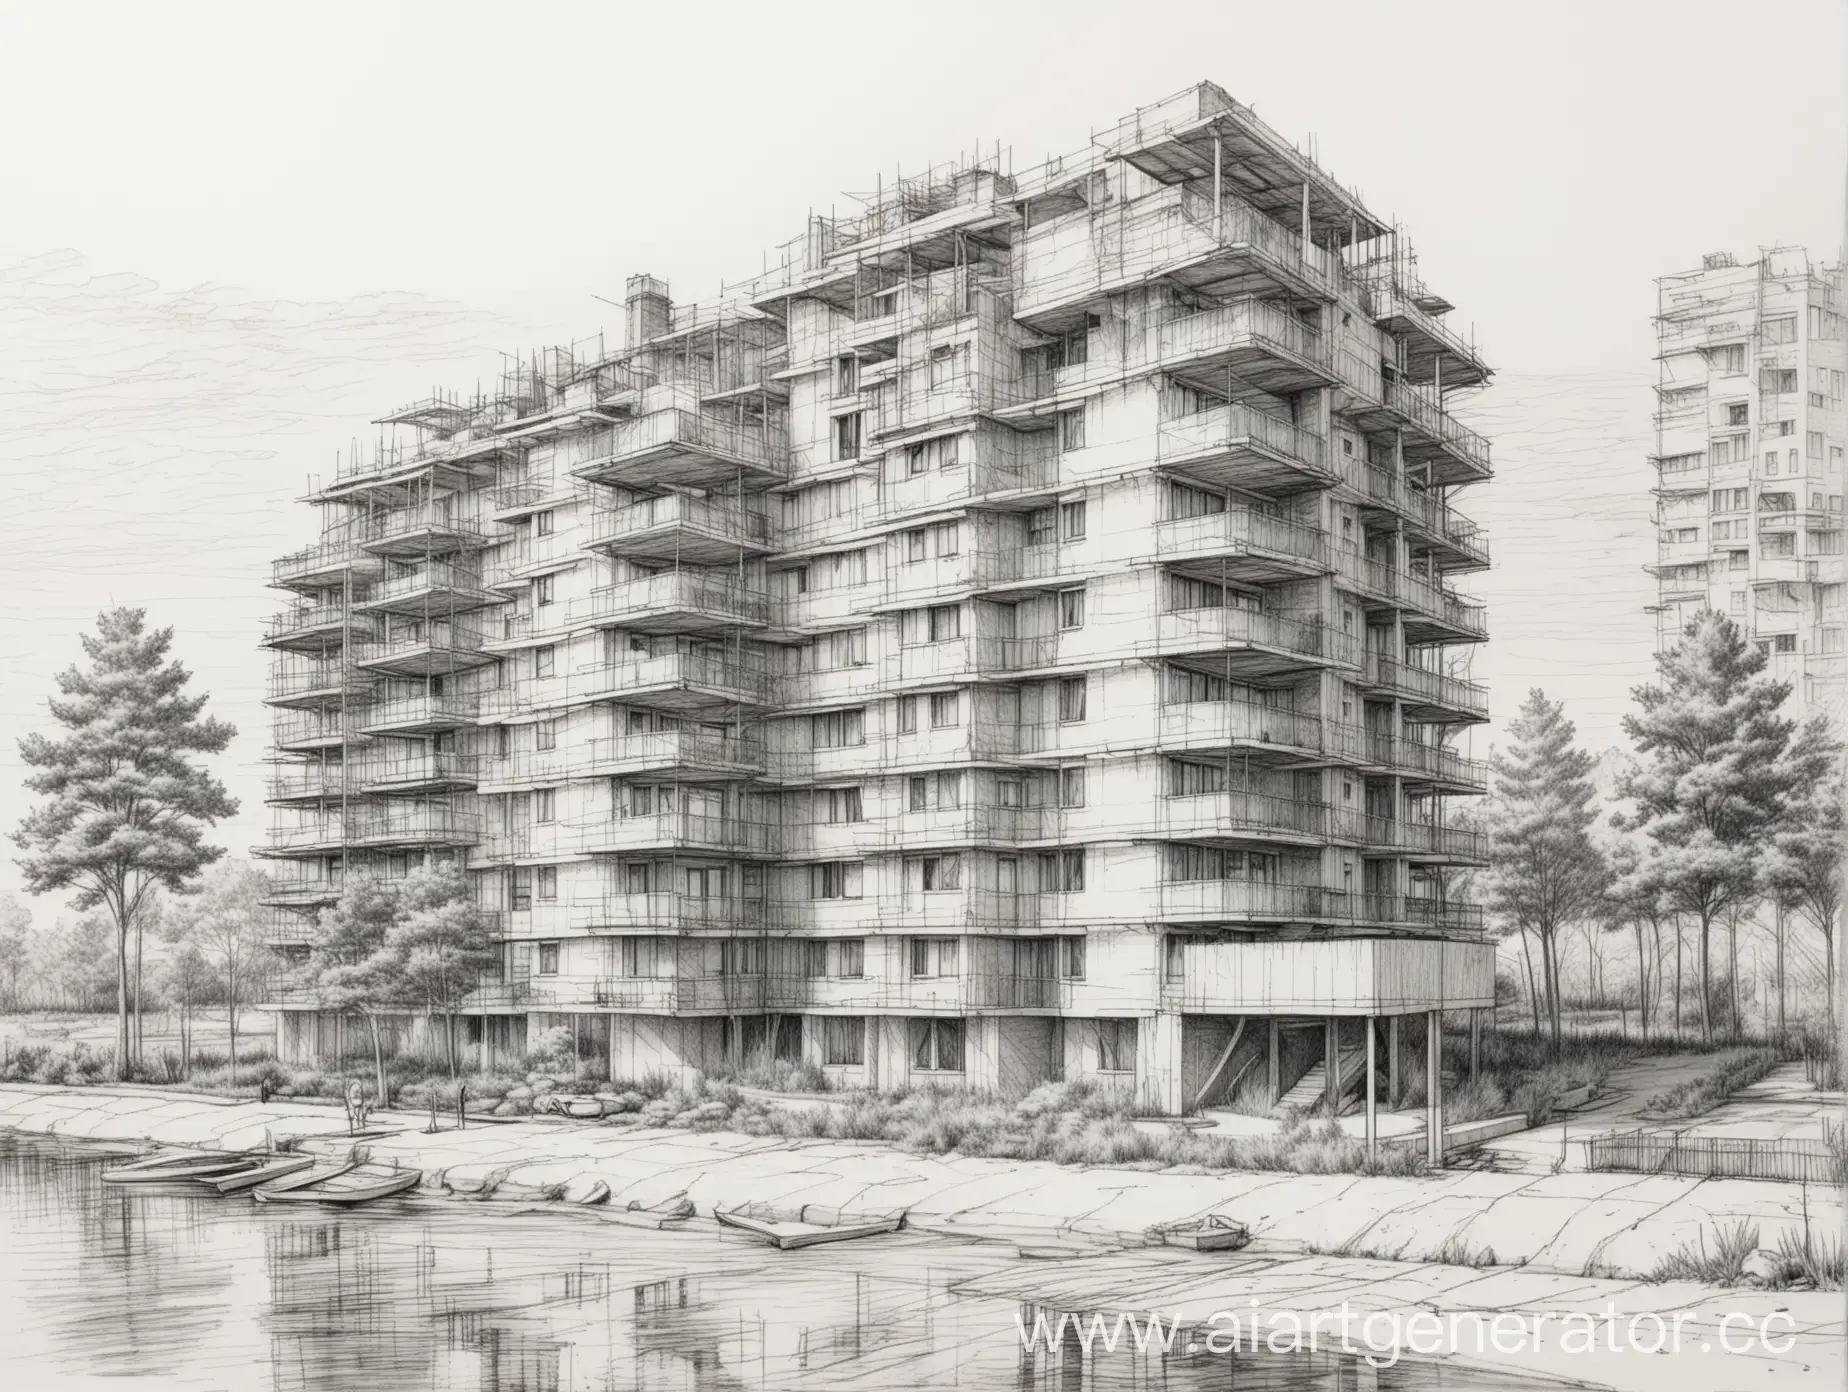 Sketch-of-MultiStory-Residential-Building-Construction-Next-to-Park-Shore